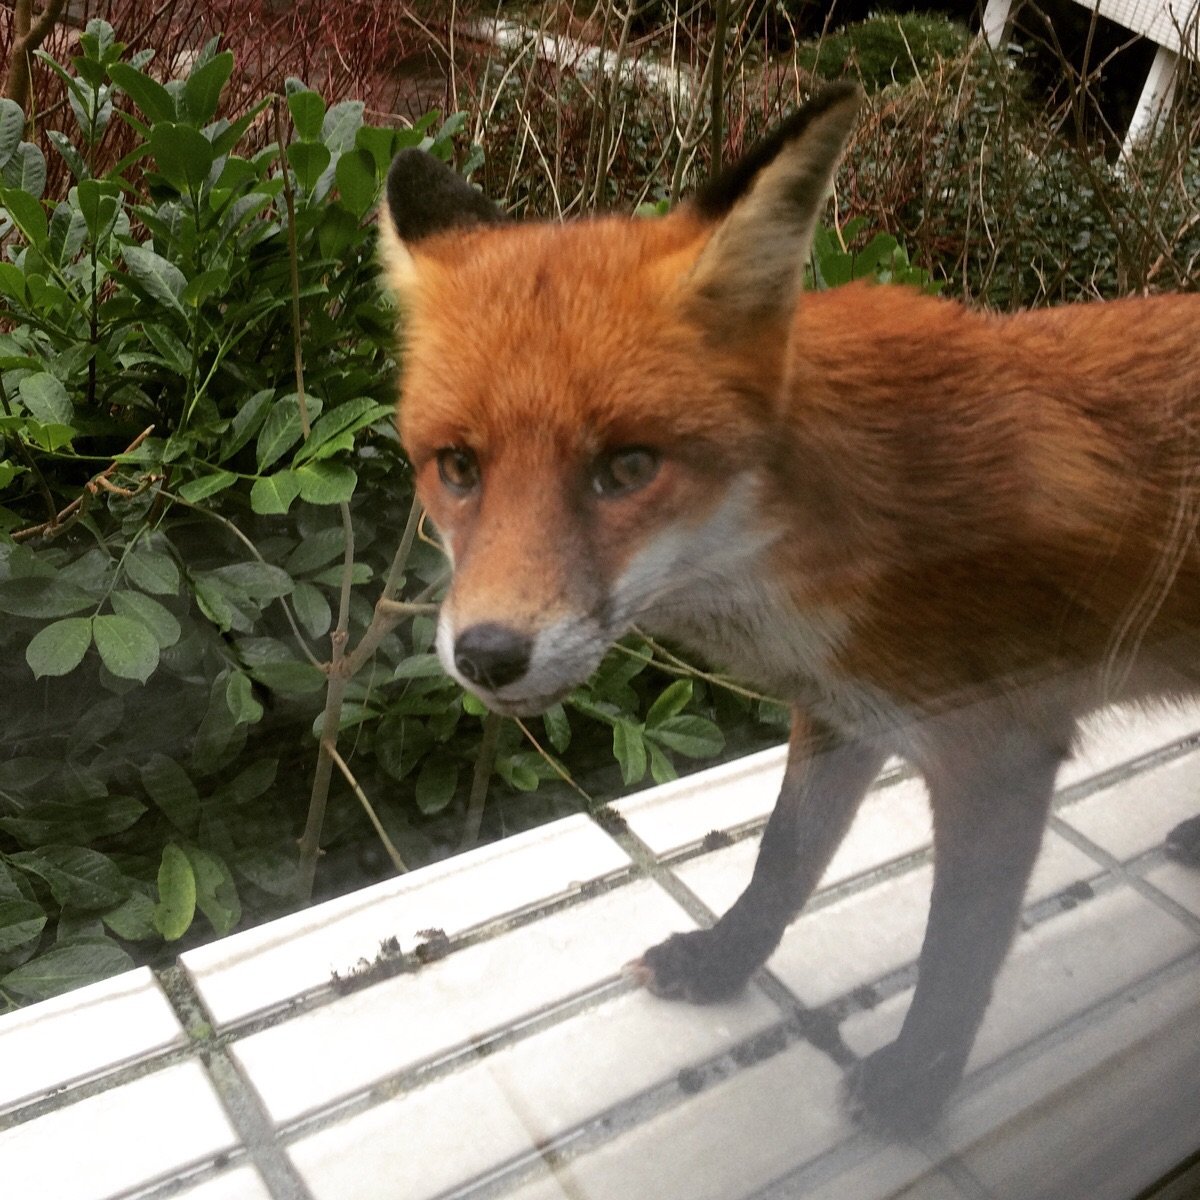 This fox came up to the window at my work